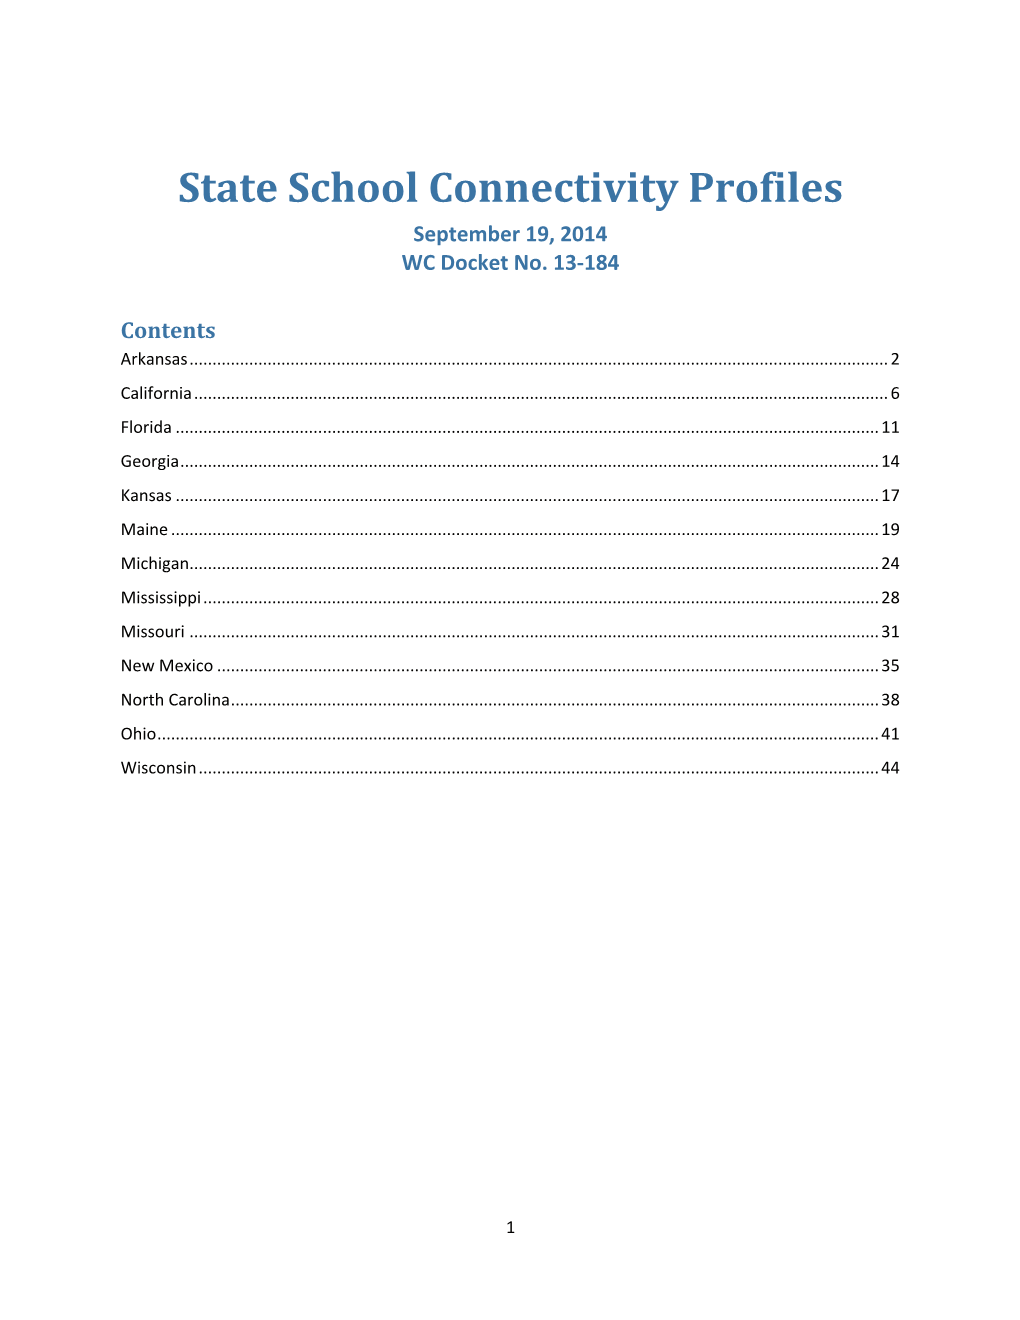 State School Connectivity Profiles September 19, 2014 WC Docket No